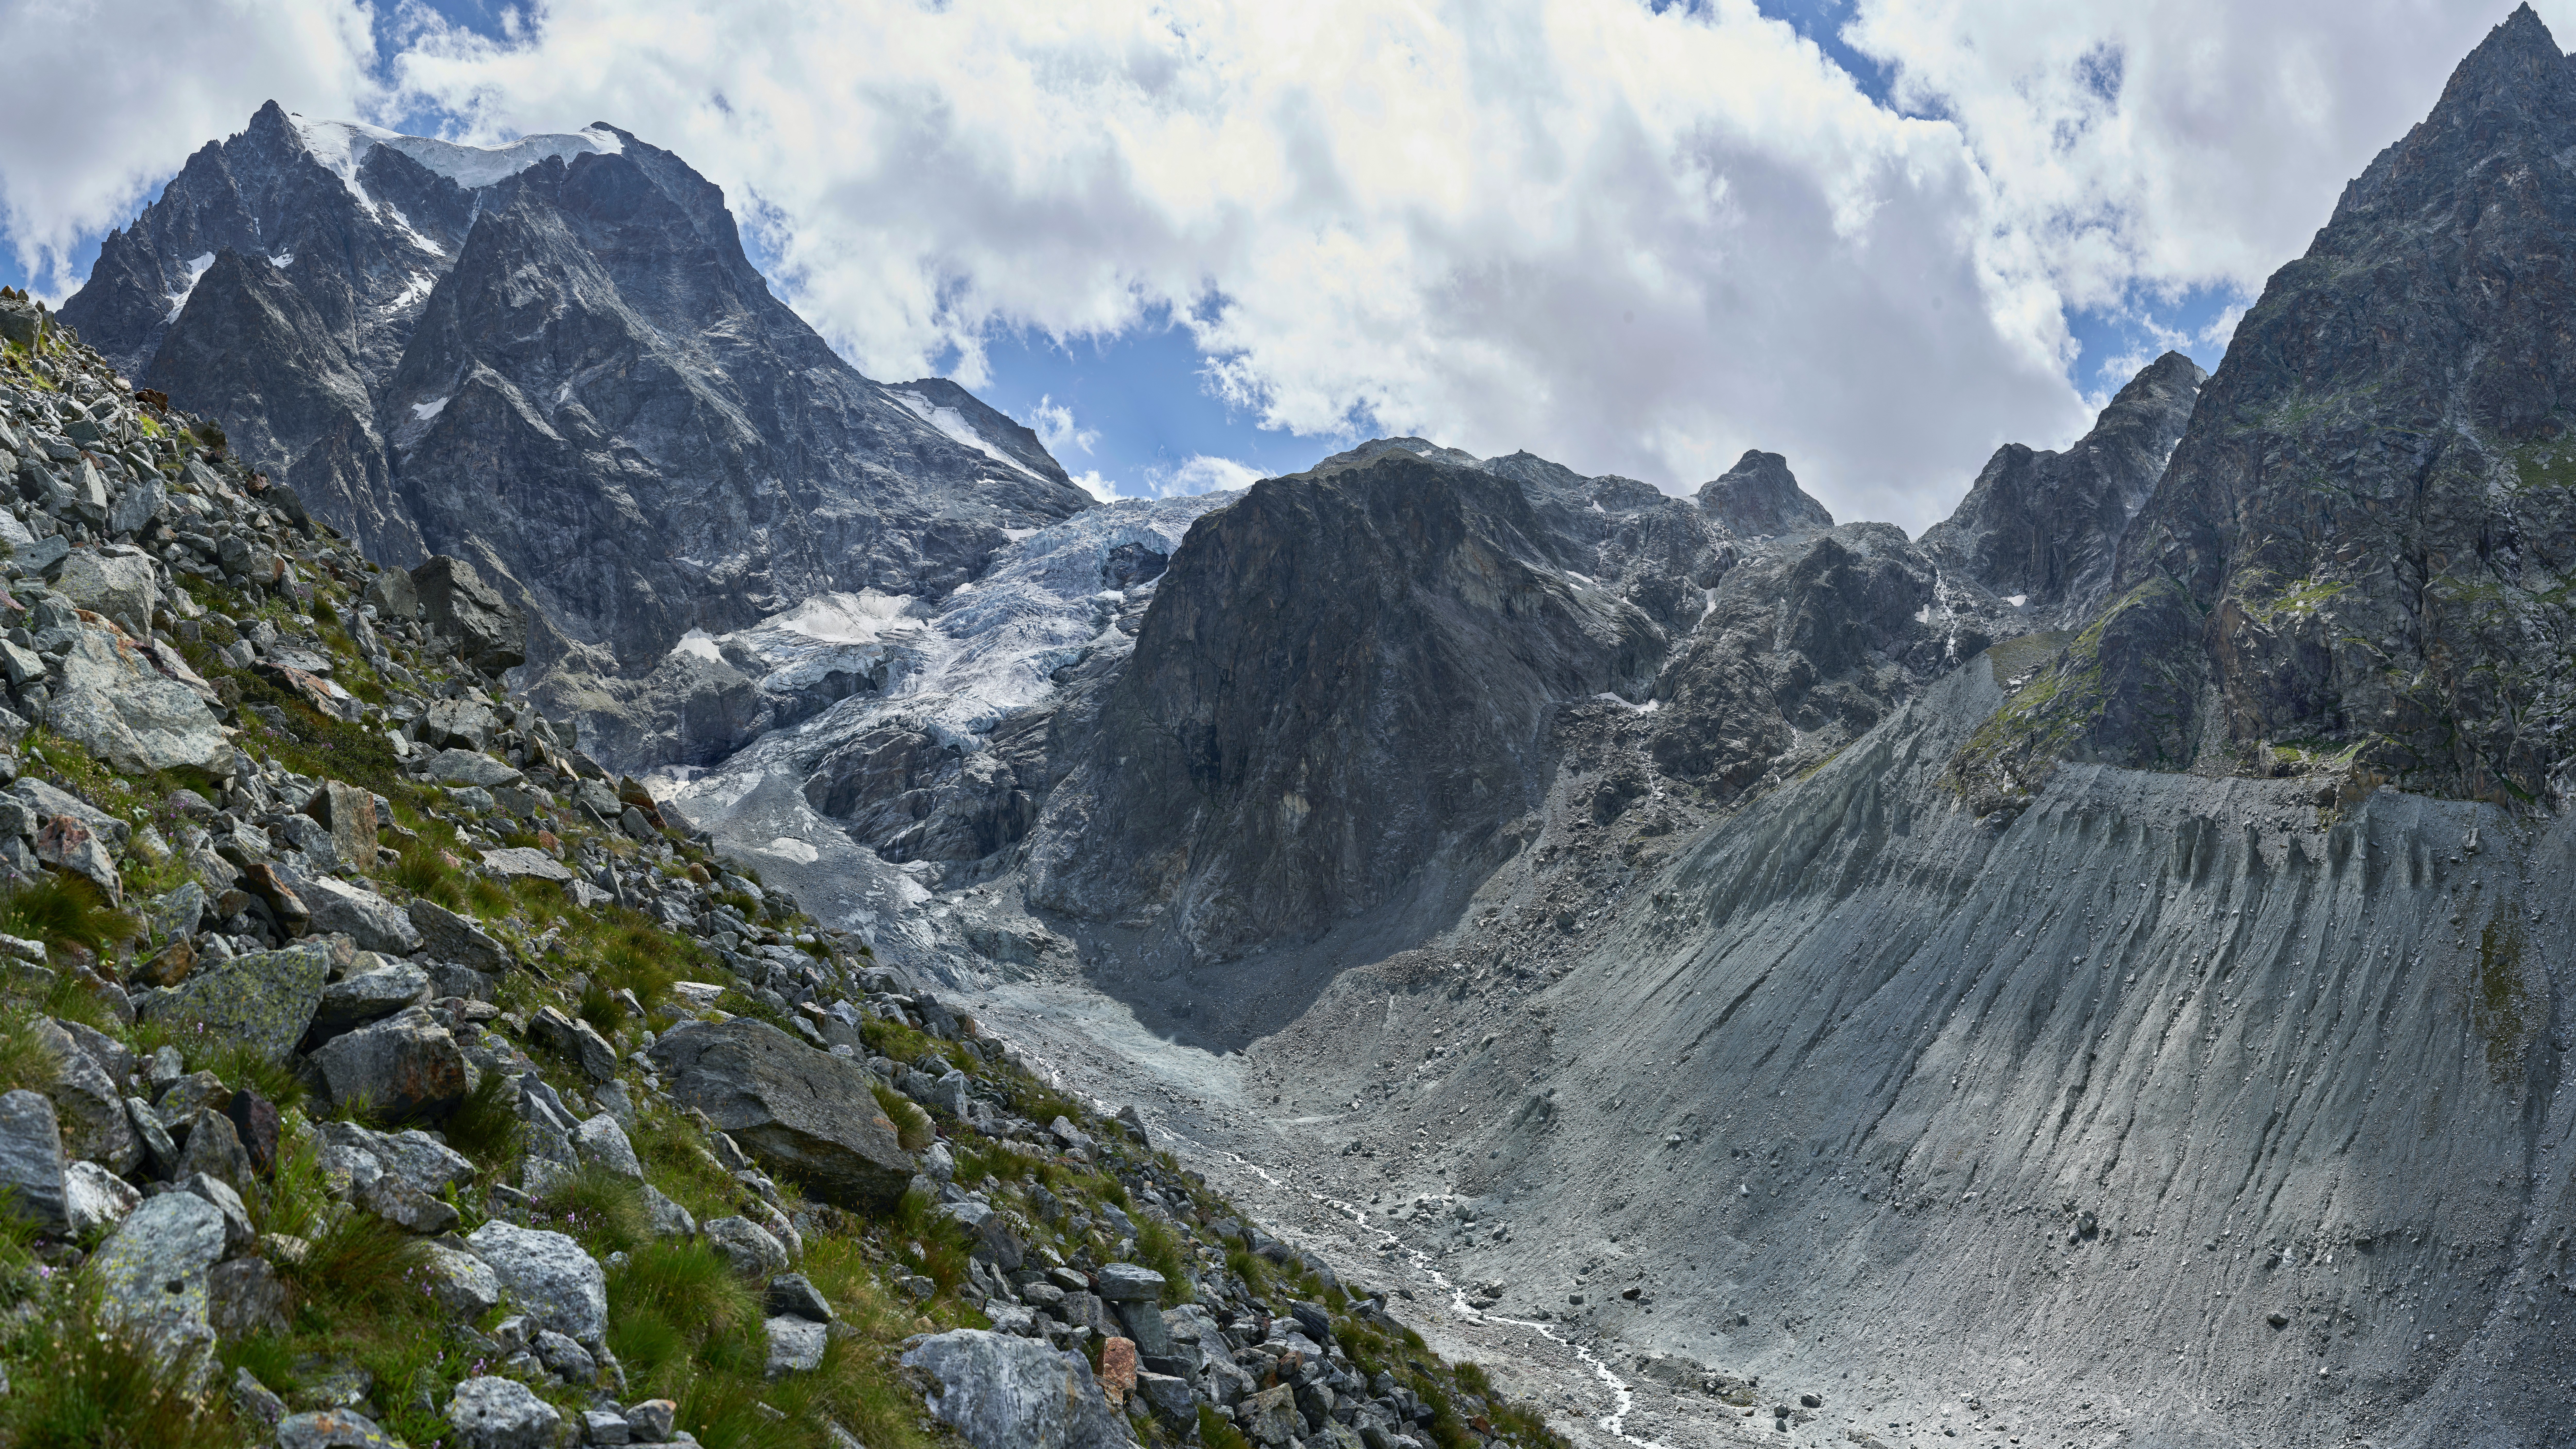 The bas glacier d'Arolla is impressive because it is raw, wild and harsh.